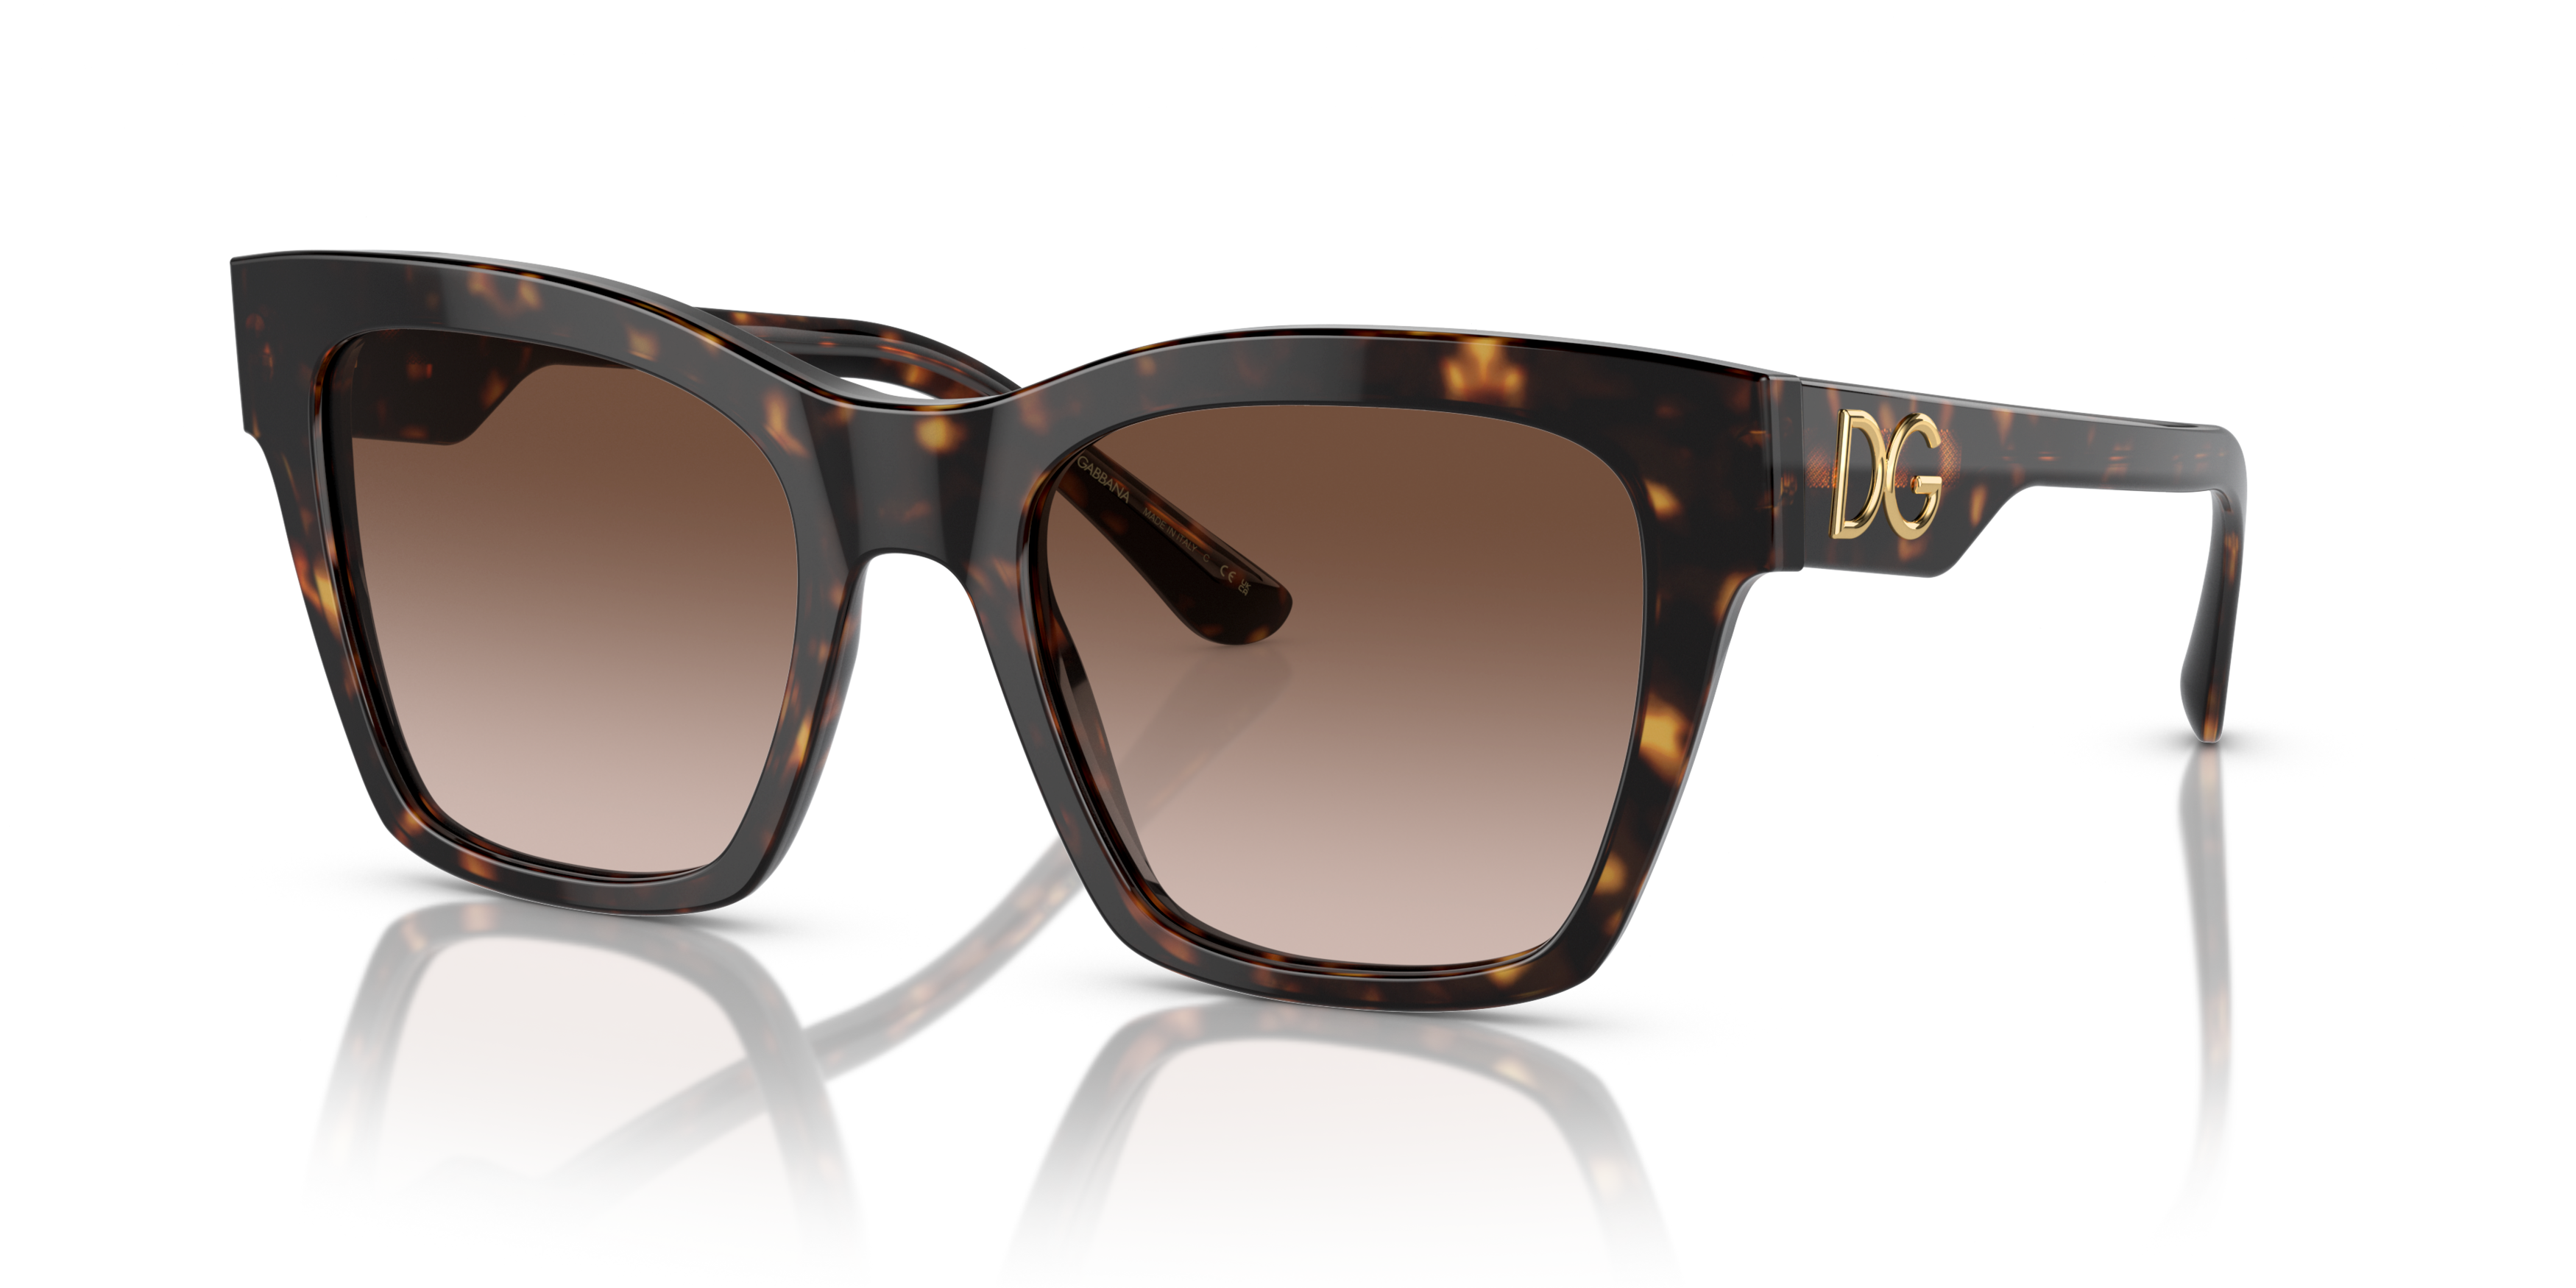 [products.image.angle_left01] DOLCE & GABBANA DG4384 502/13